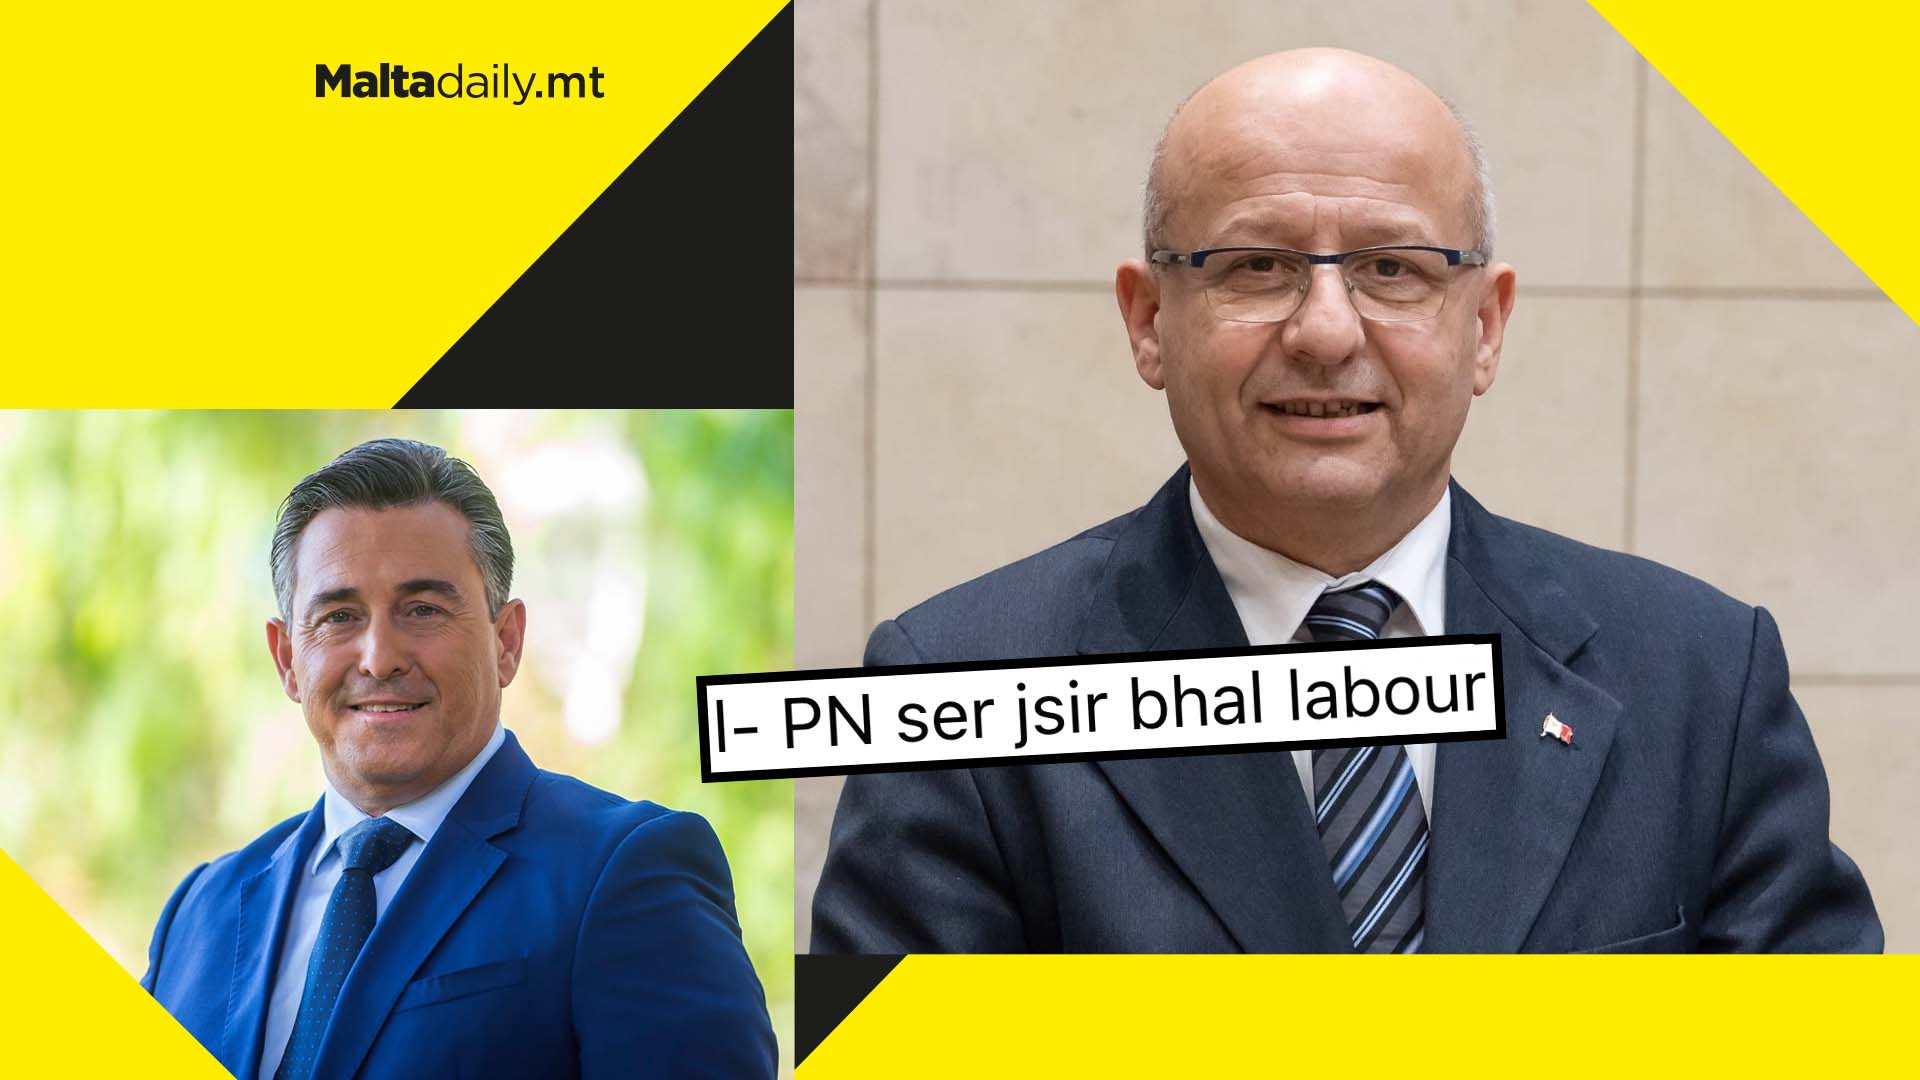 "The PN is becoming populist like Labour", says former PN MP Edwin Vassallo